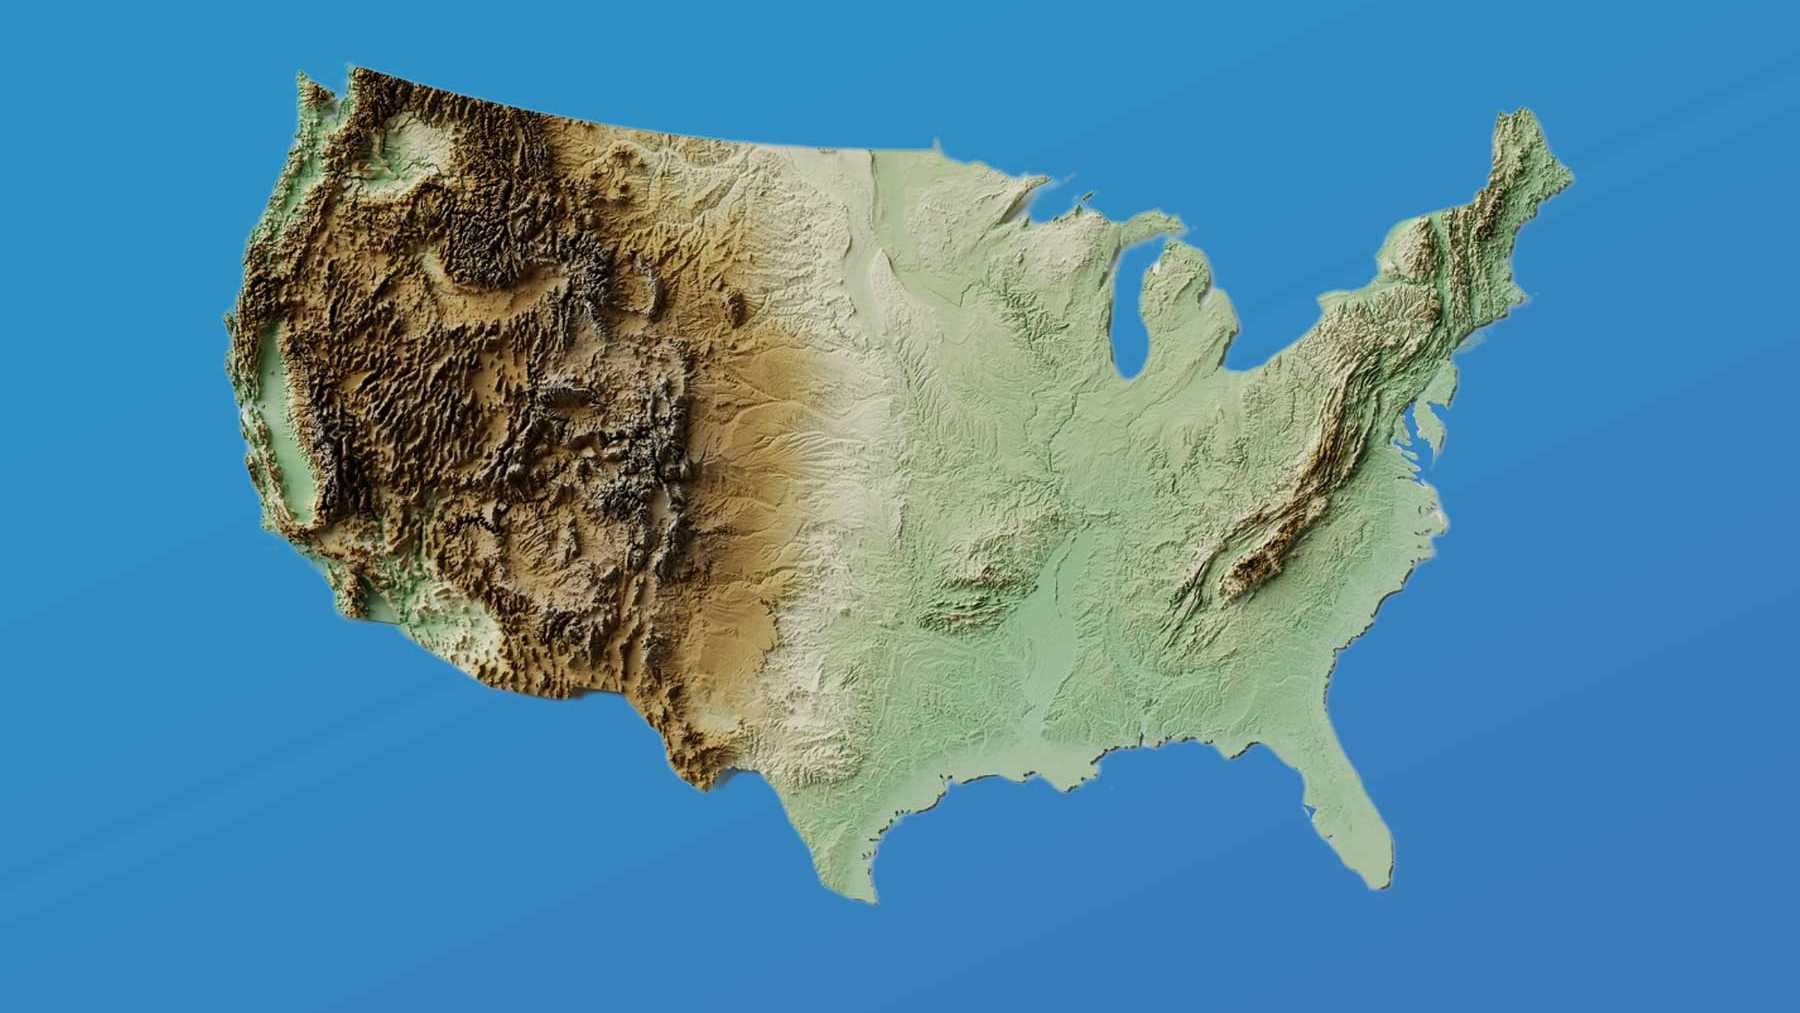 Image of the United States